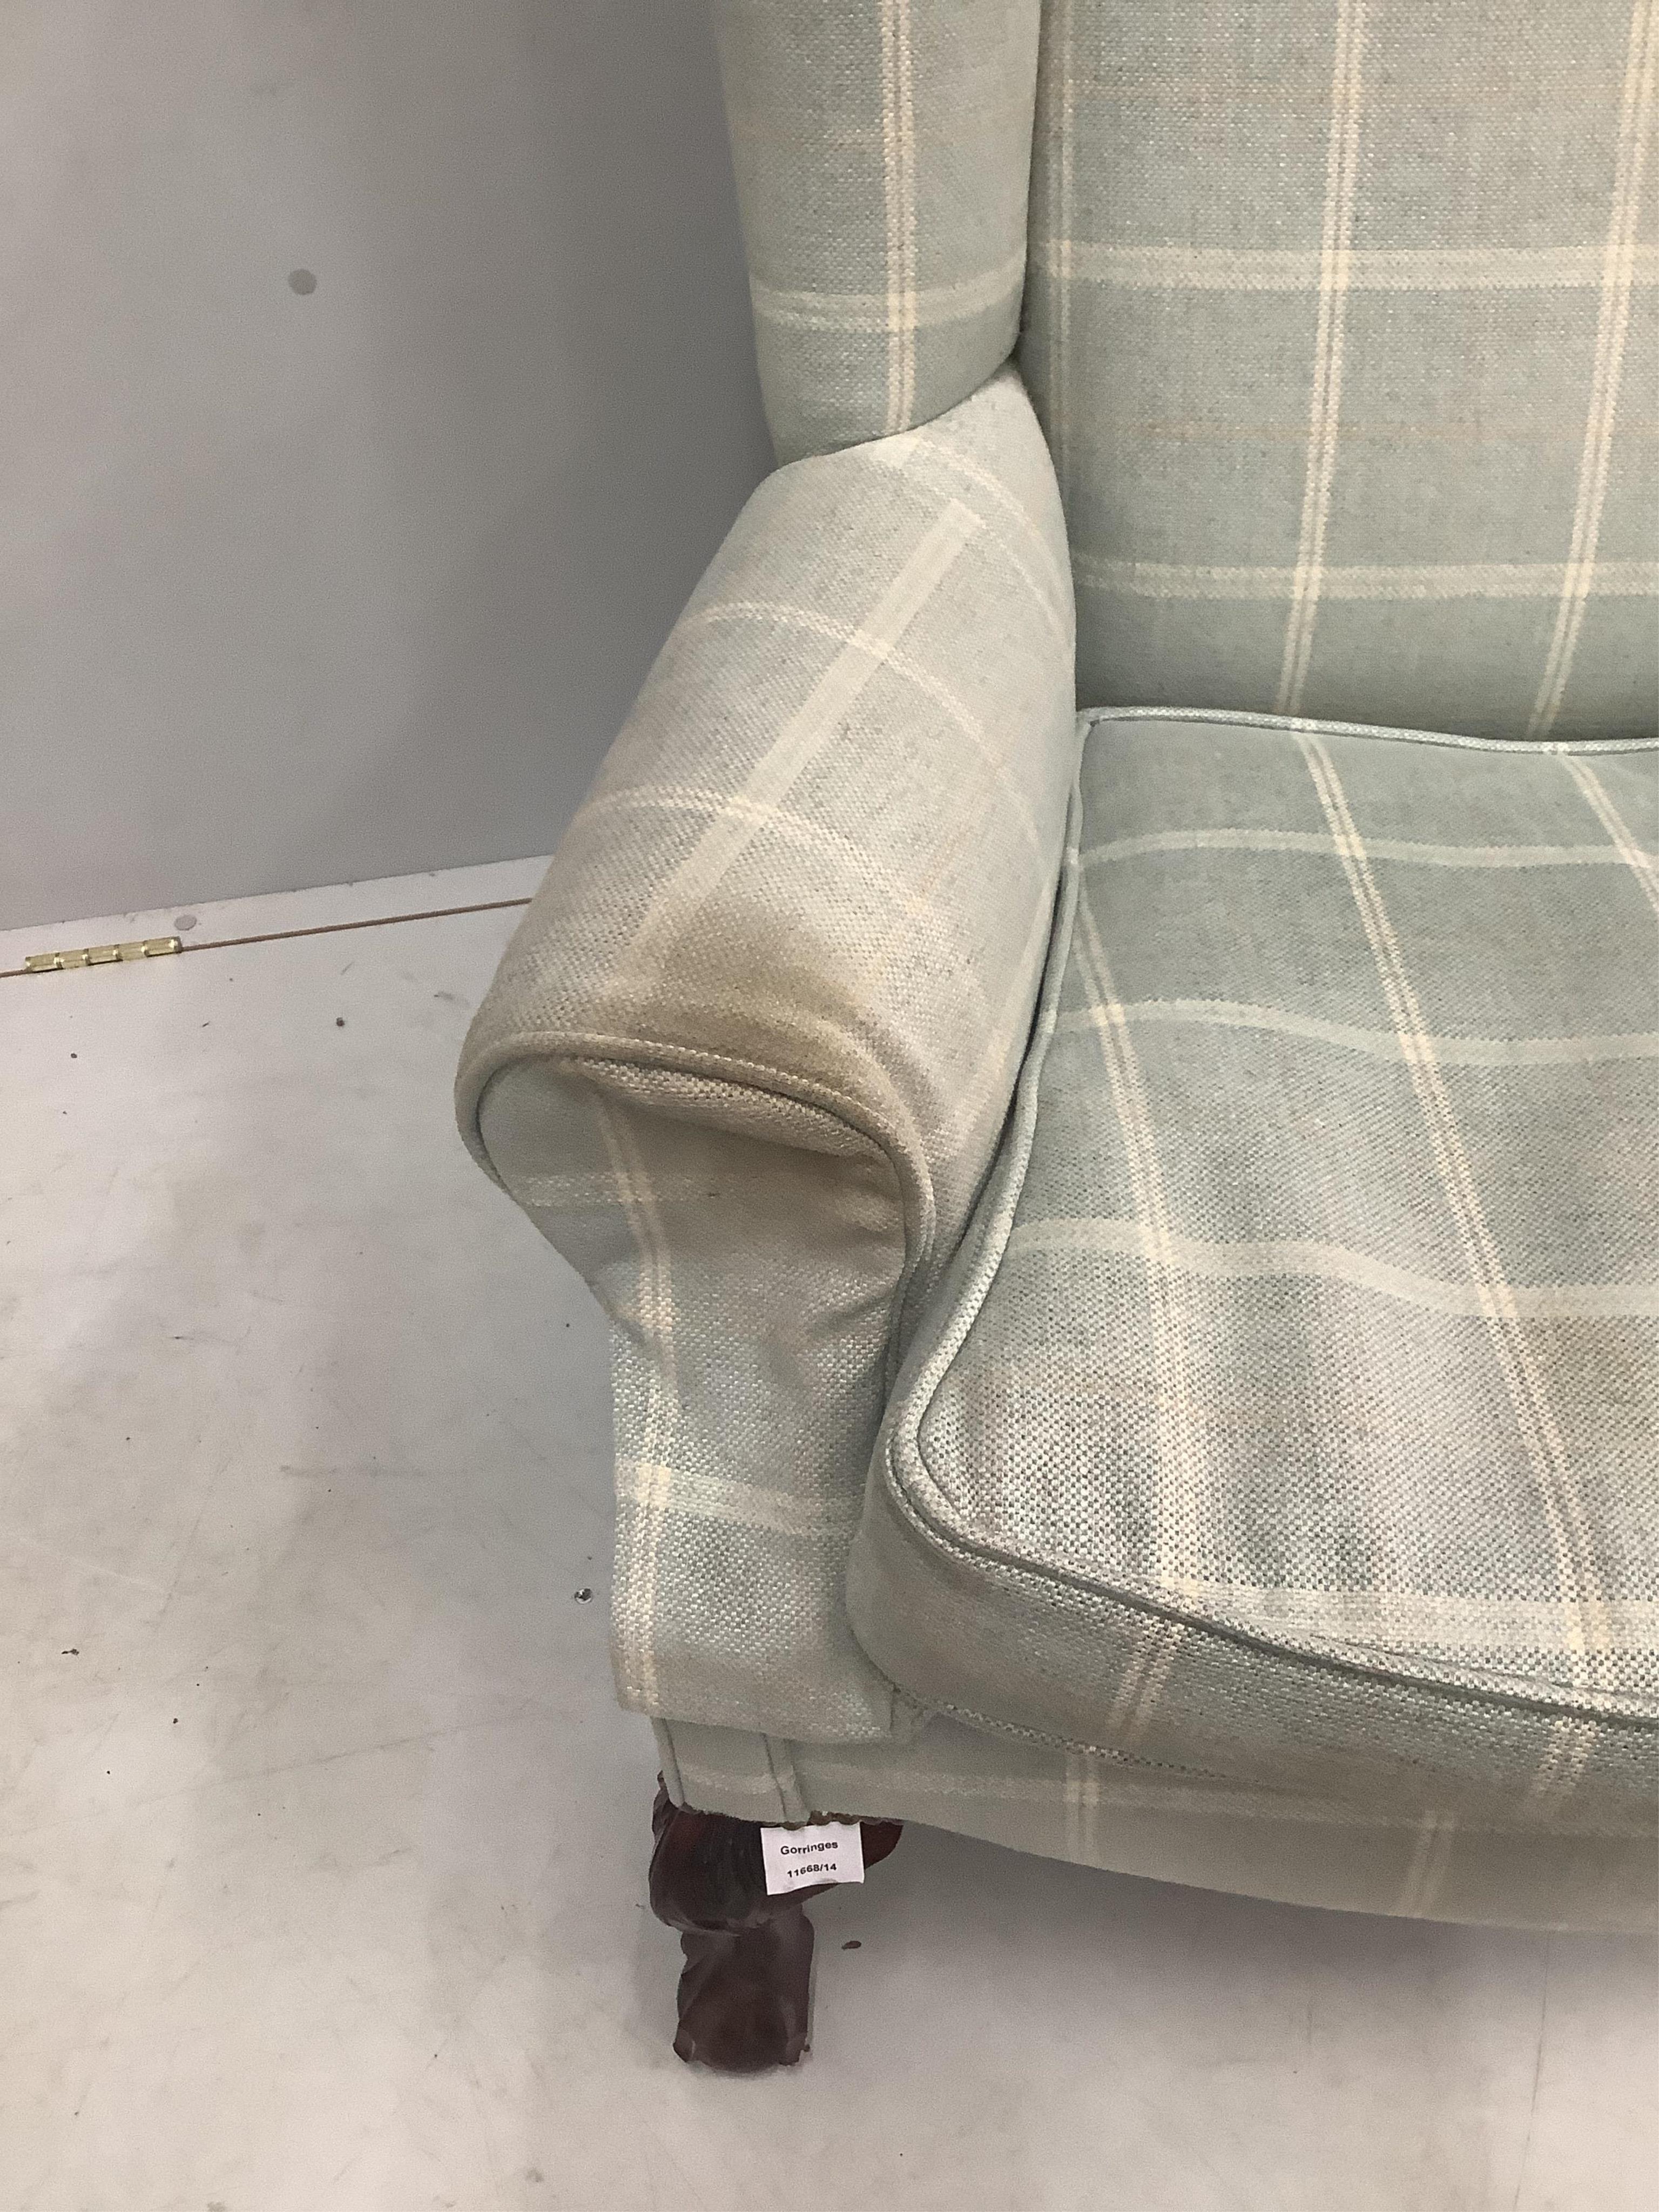 A George I styles upholstered wingback armchair, width 79cm, depth 76cm, height 120cm. Condition - fair